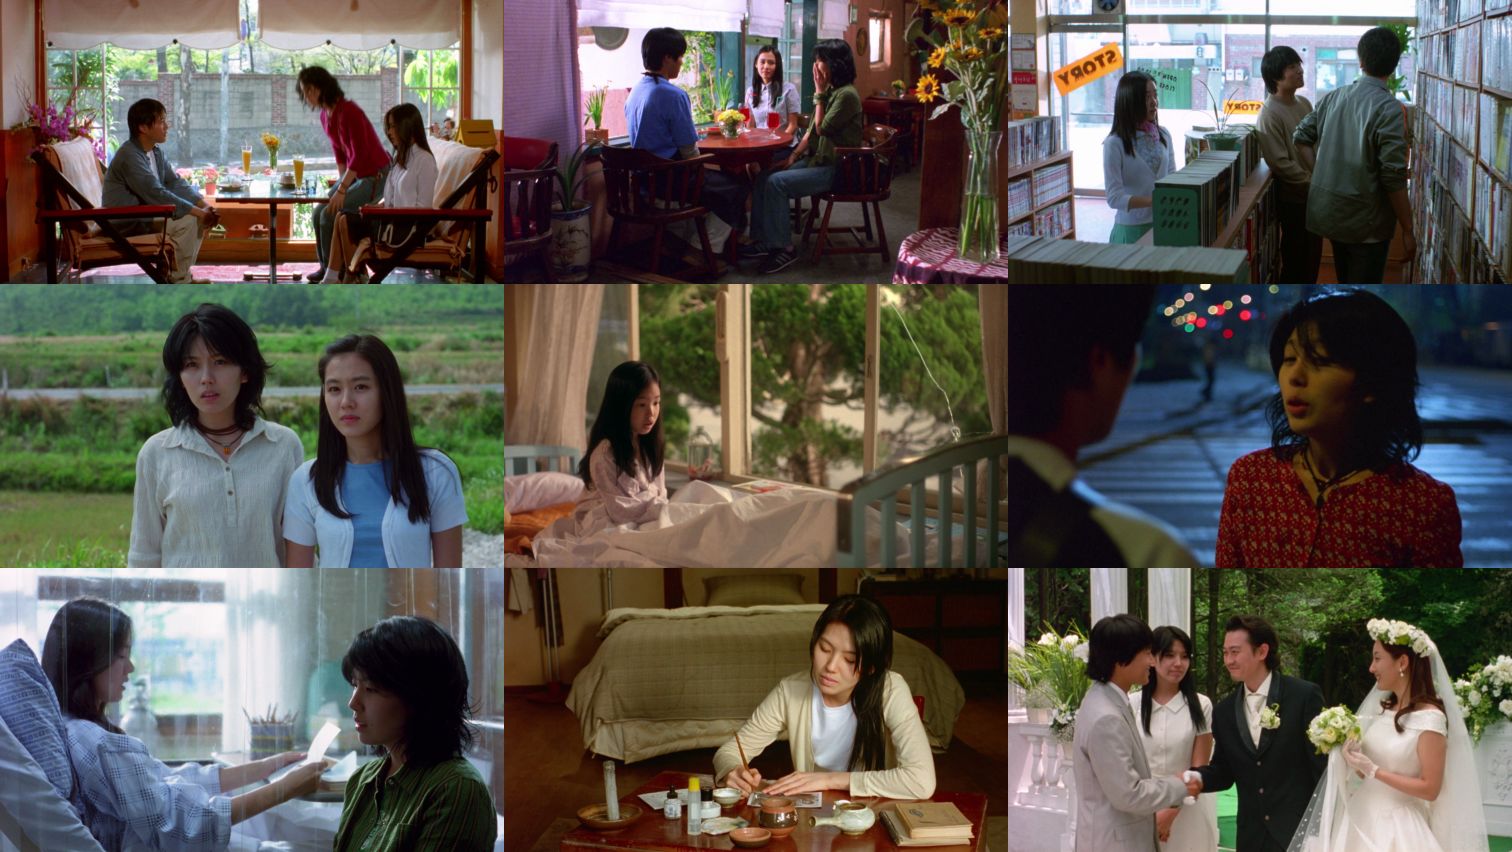 󰮡Ұ Lovers.Concerto.2002.1080p.BluRay.x264-GiMCHi 7.66GB-2.png